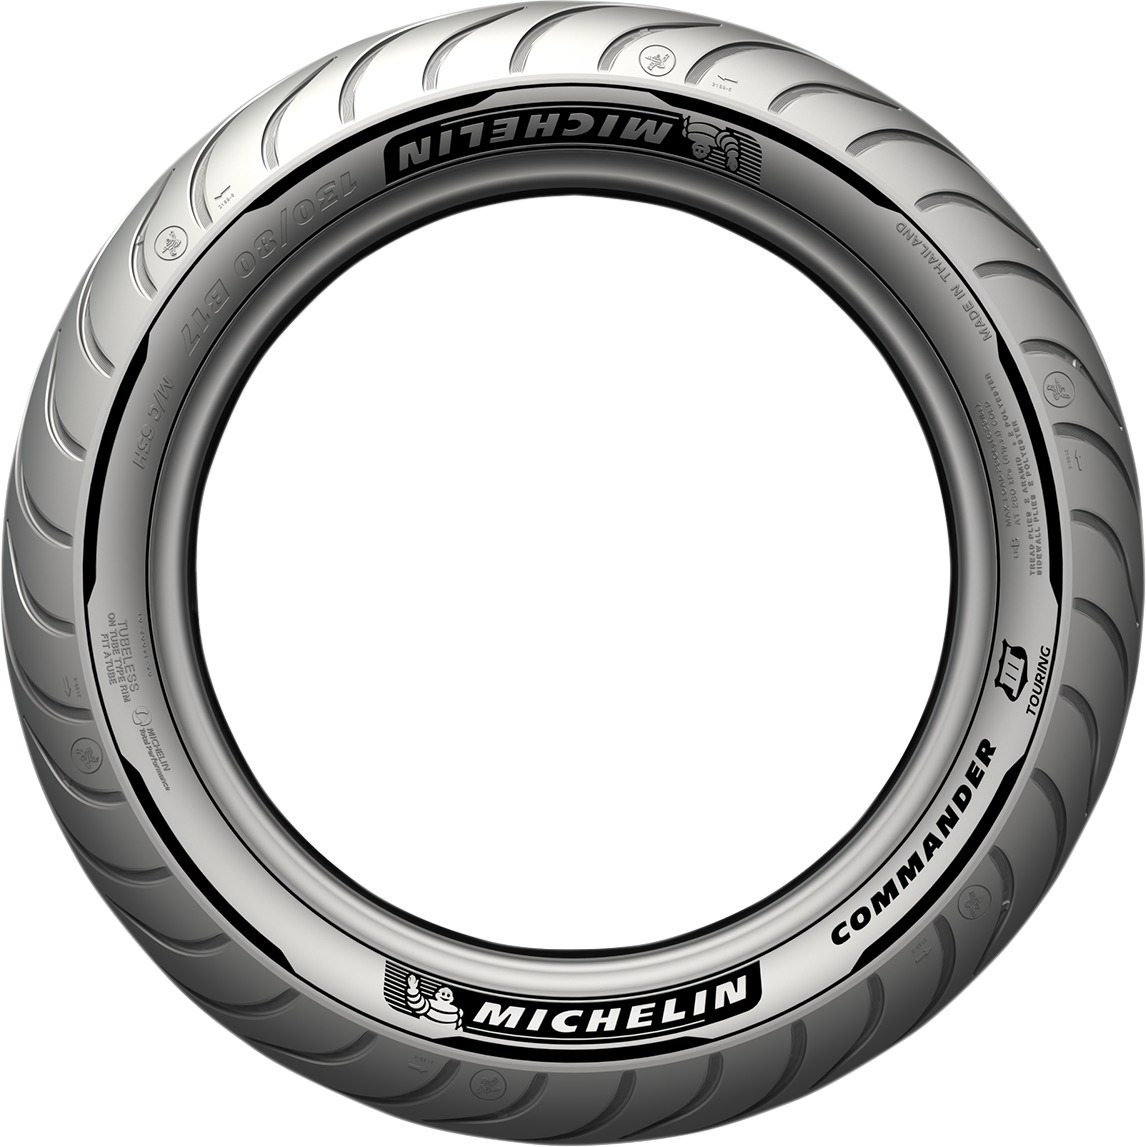 120/70 R 19 60V Commander III Front Touring Tire - TL/TT - Click Image to Close